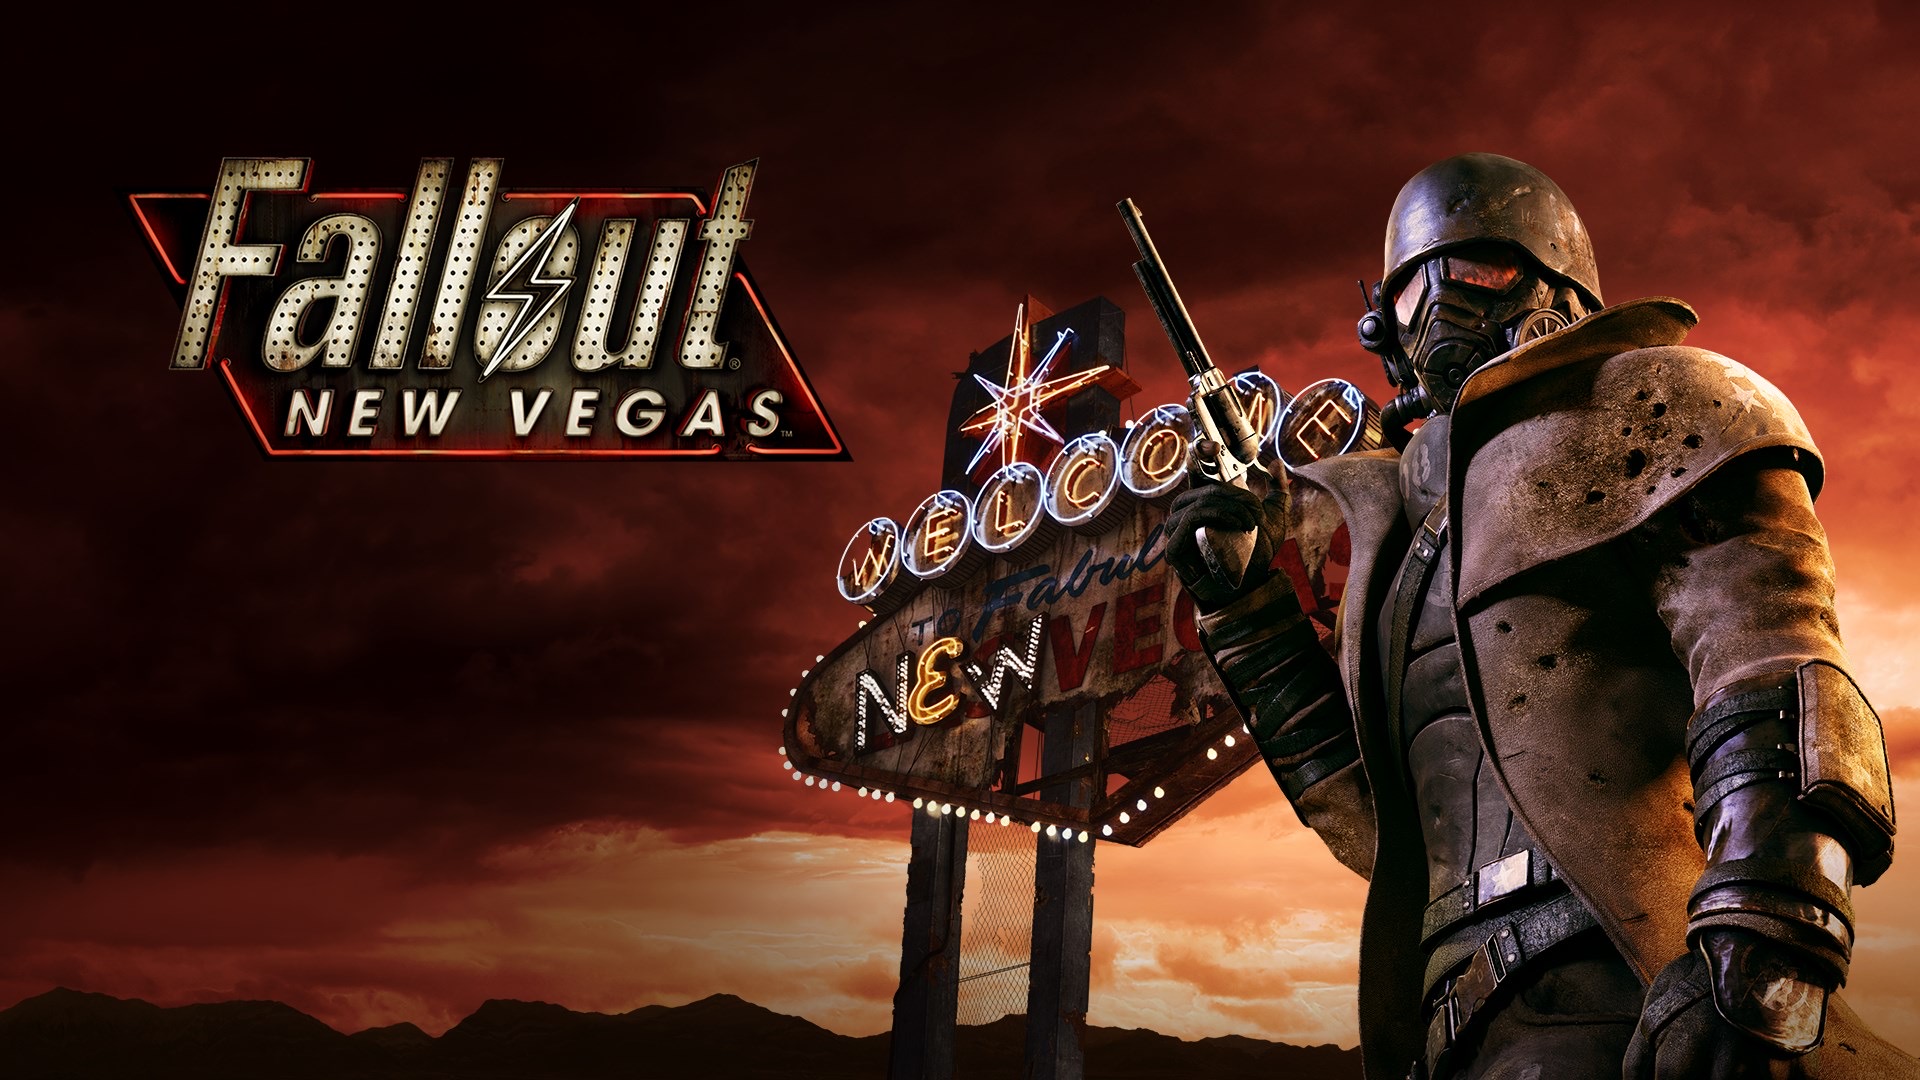 Fallout 4 New Vegas 2 Files Surfaced Online Leaving Fans Guessing